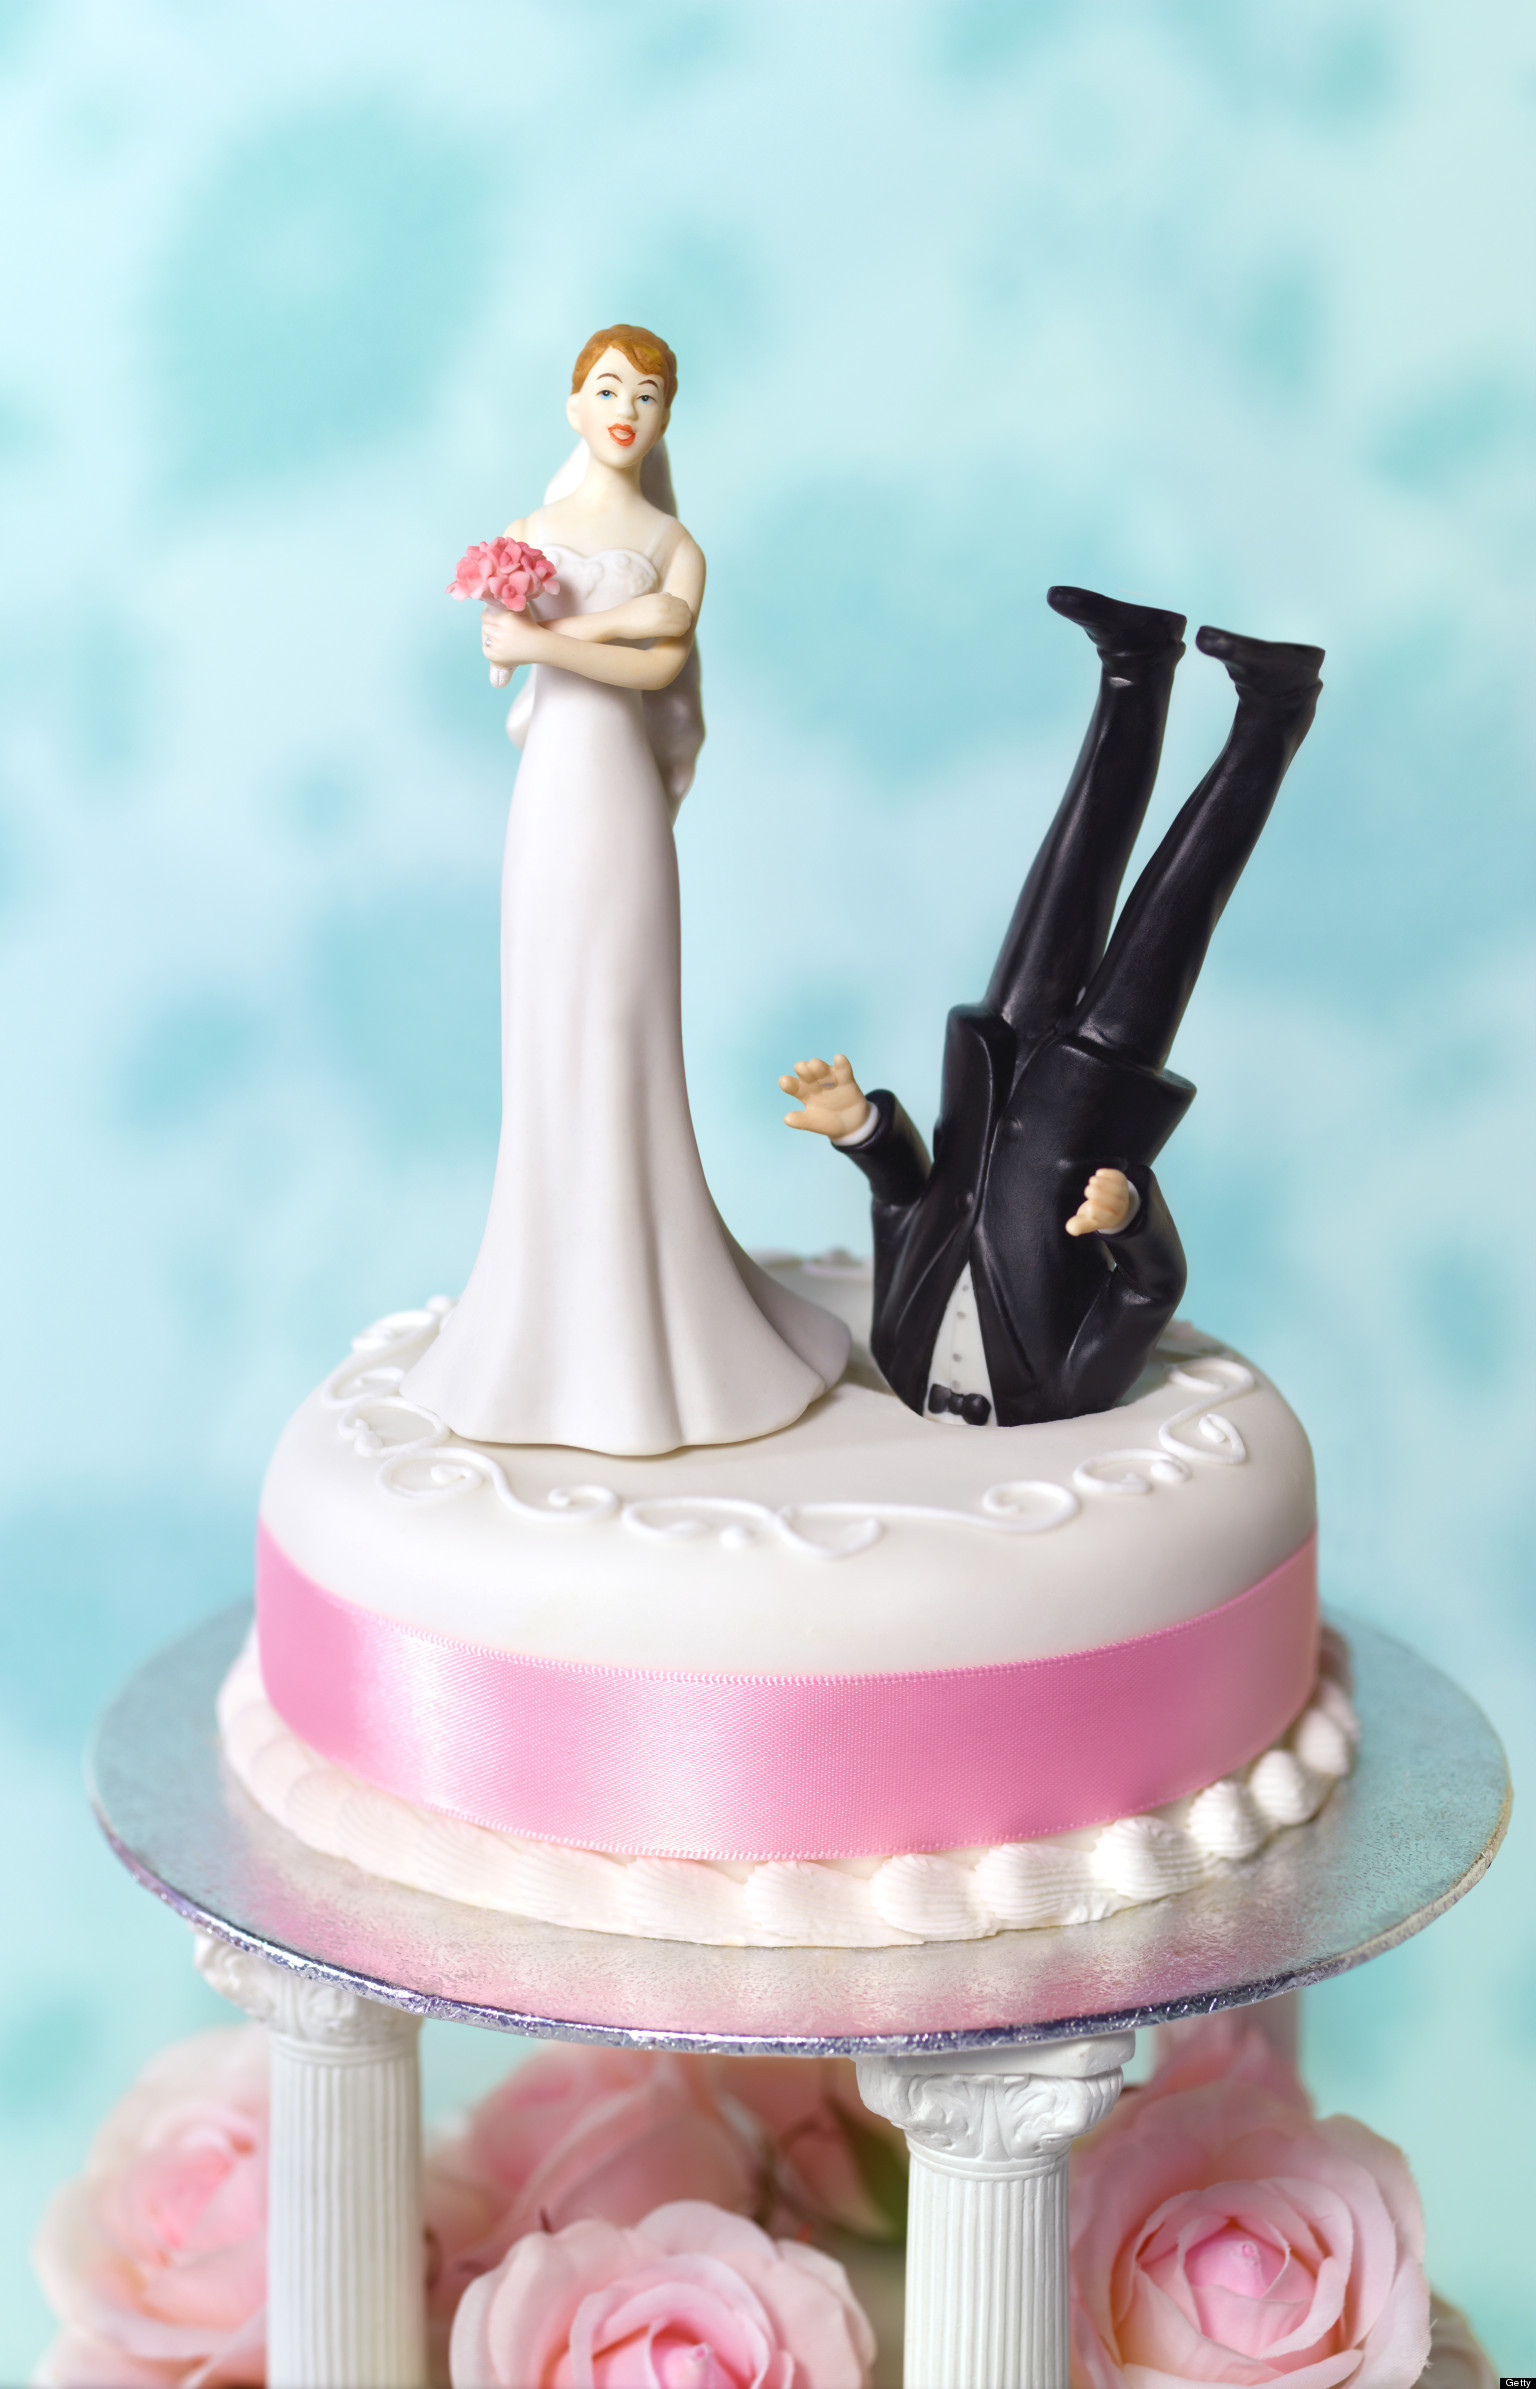 Hilarious Wedding Cake Toppers
 15 Funny Wedding Cake Toppers to Make Your Guests Laugh